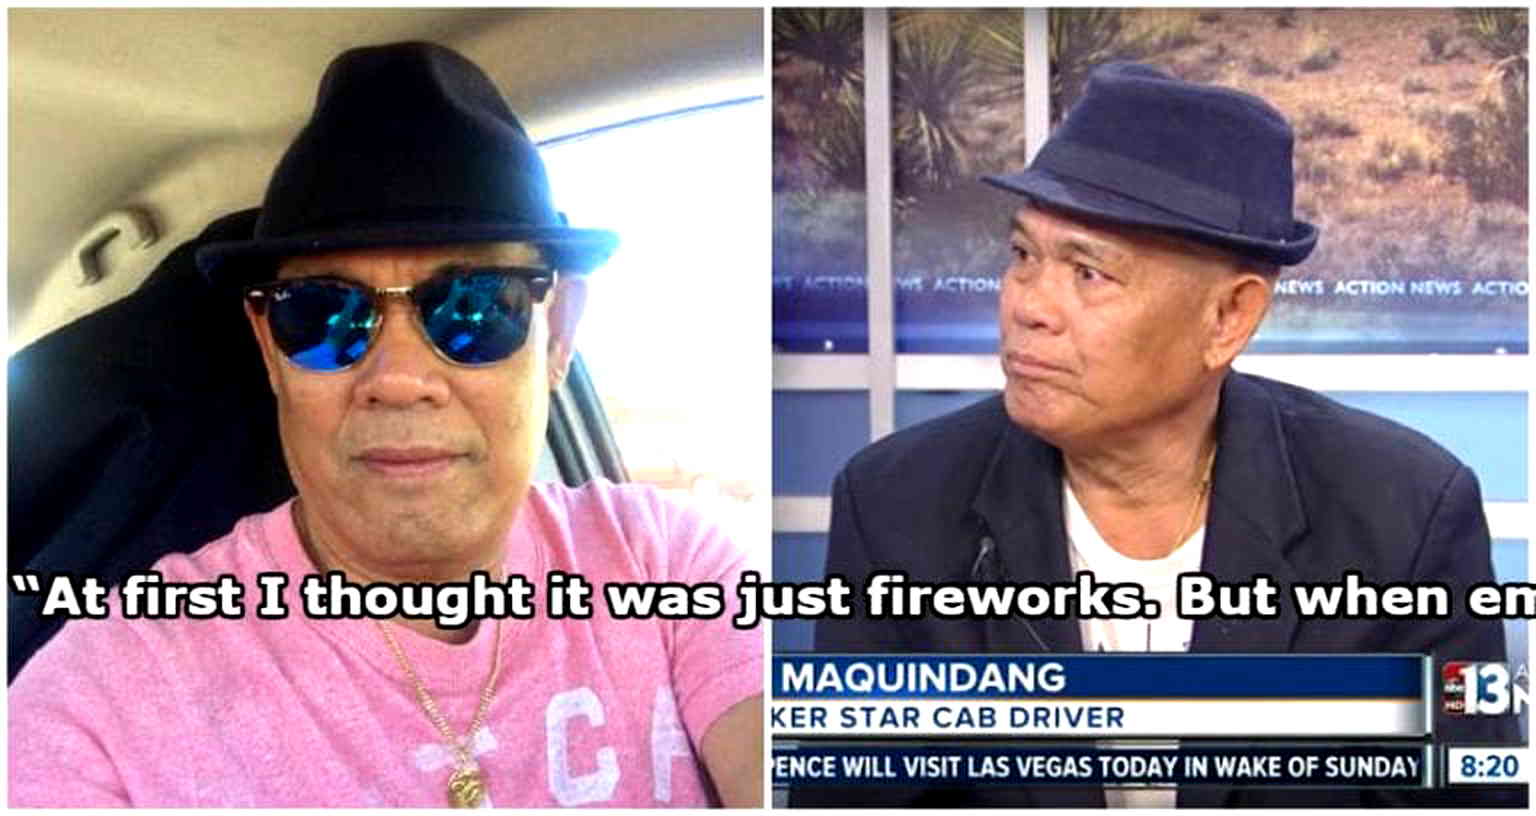 Meet the Filipino Cab Driver Who Saved 6 People During the Las Vegas Massacre